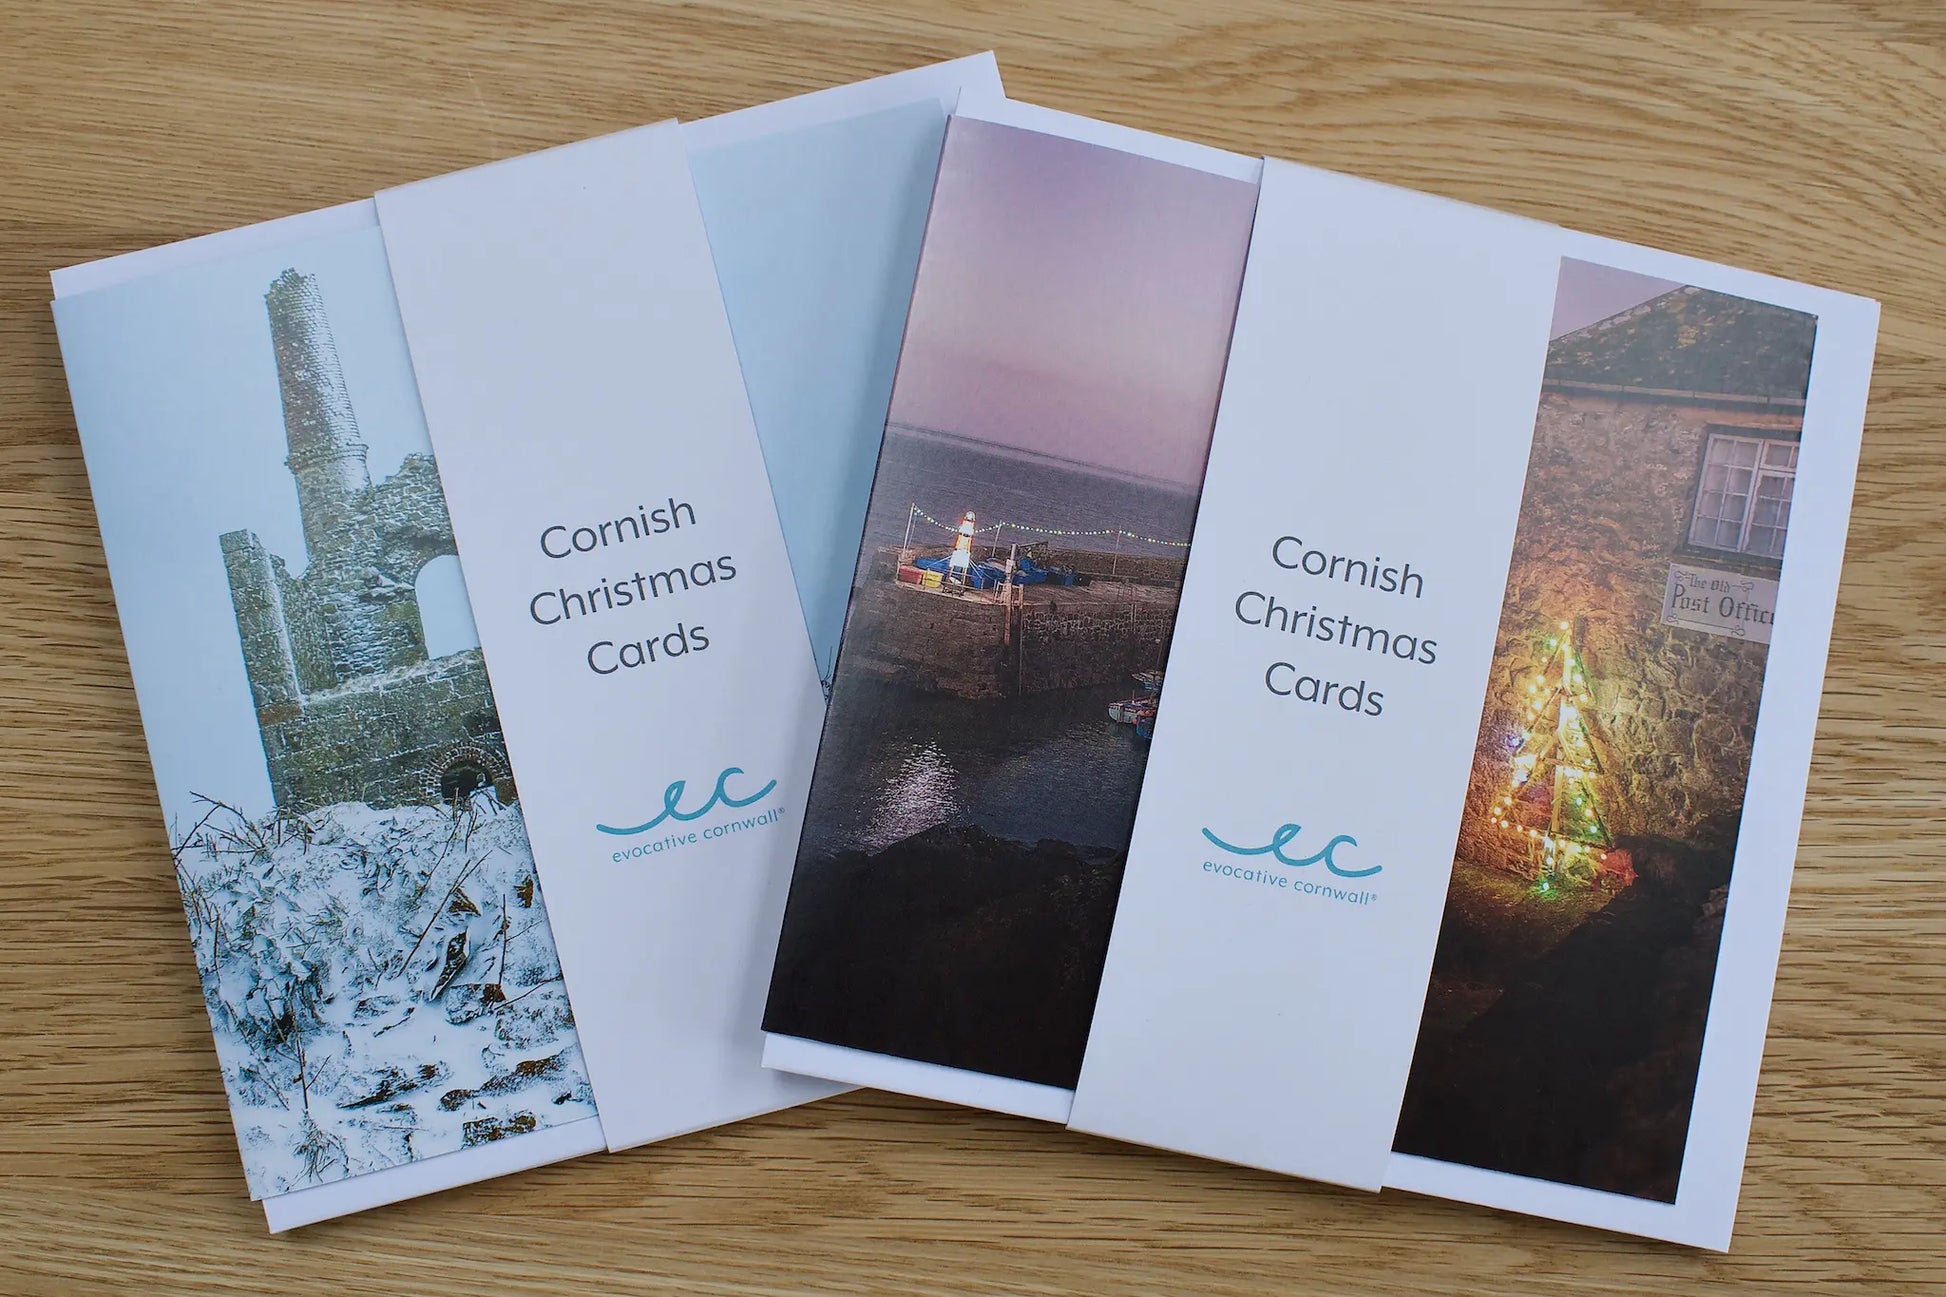 Evocative Cornwall Christmas cards in packs